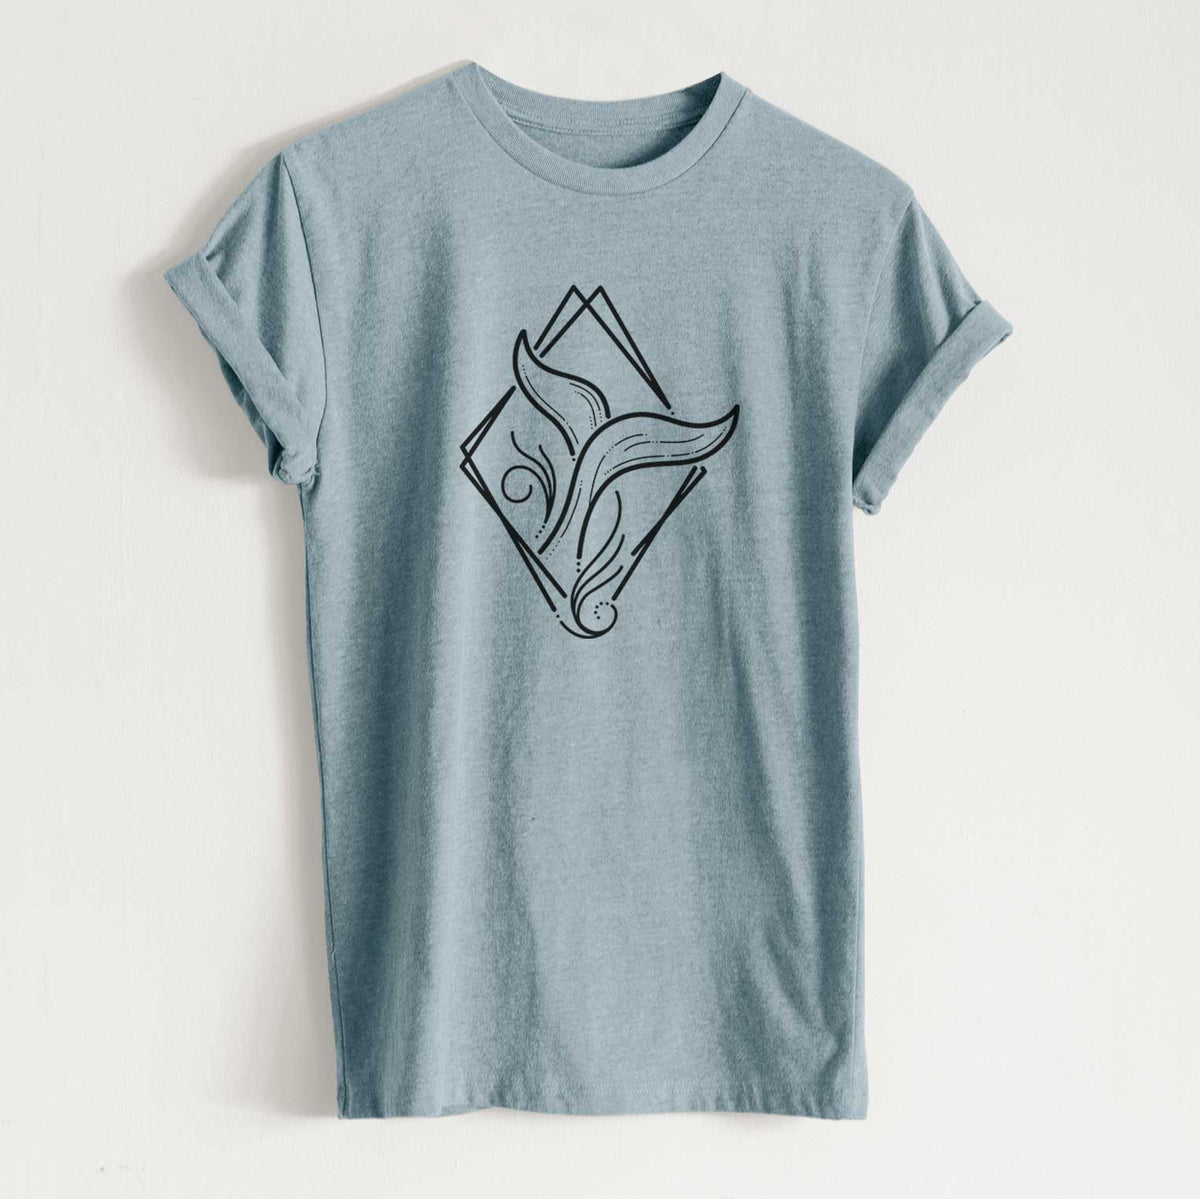 Whale Diamond - Unisex Recycled Eco Tee  - CLOSEOUT - FINAL SALE